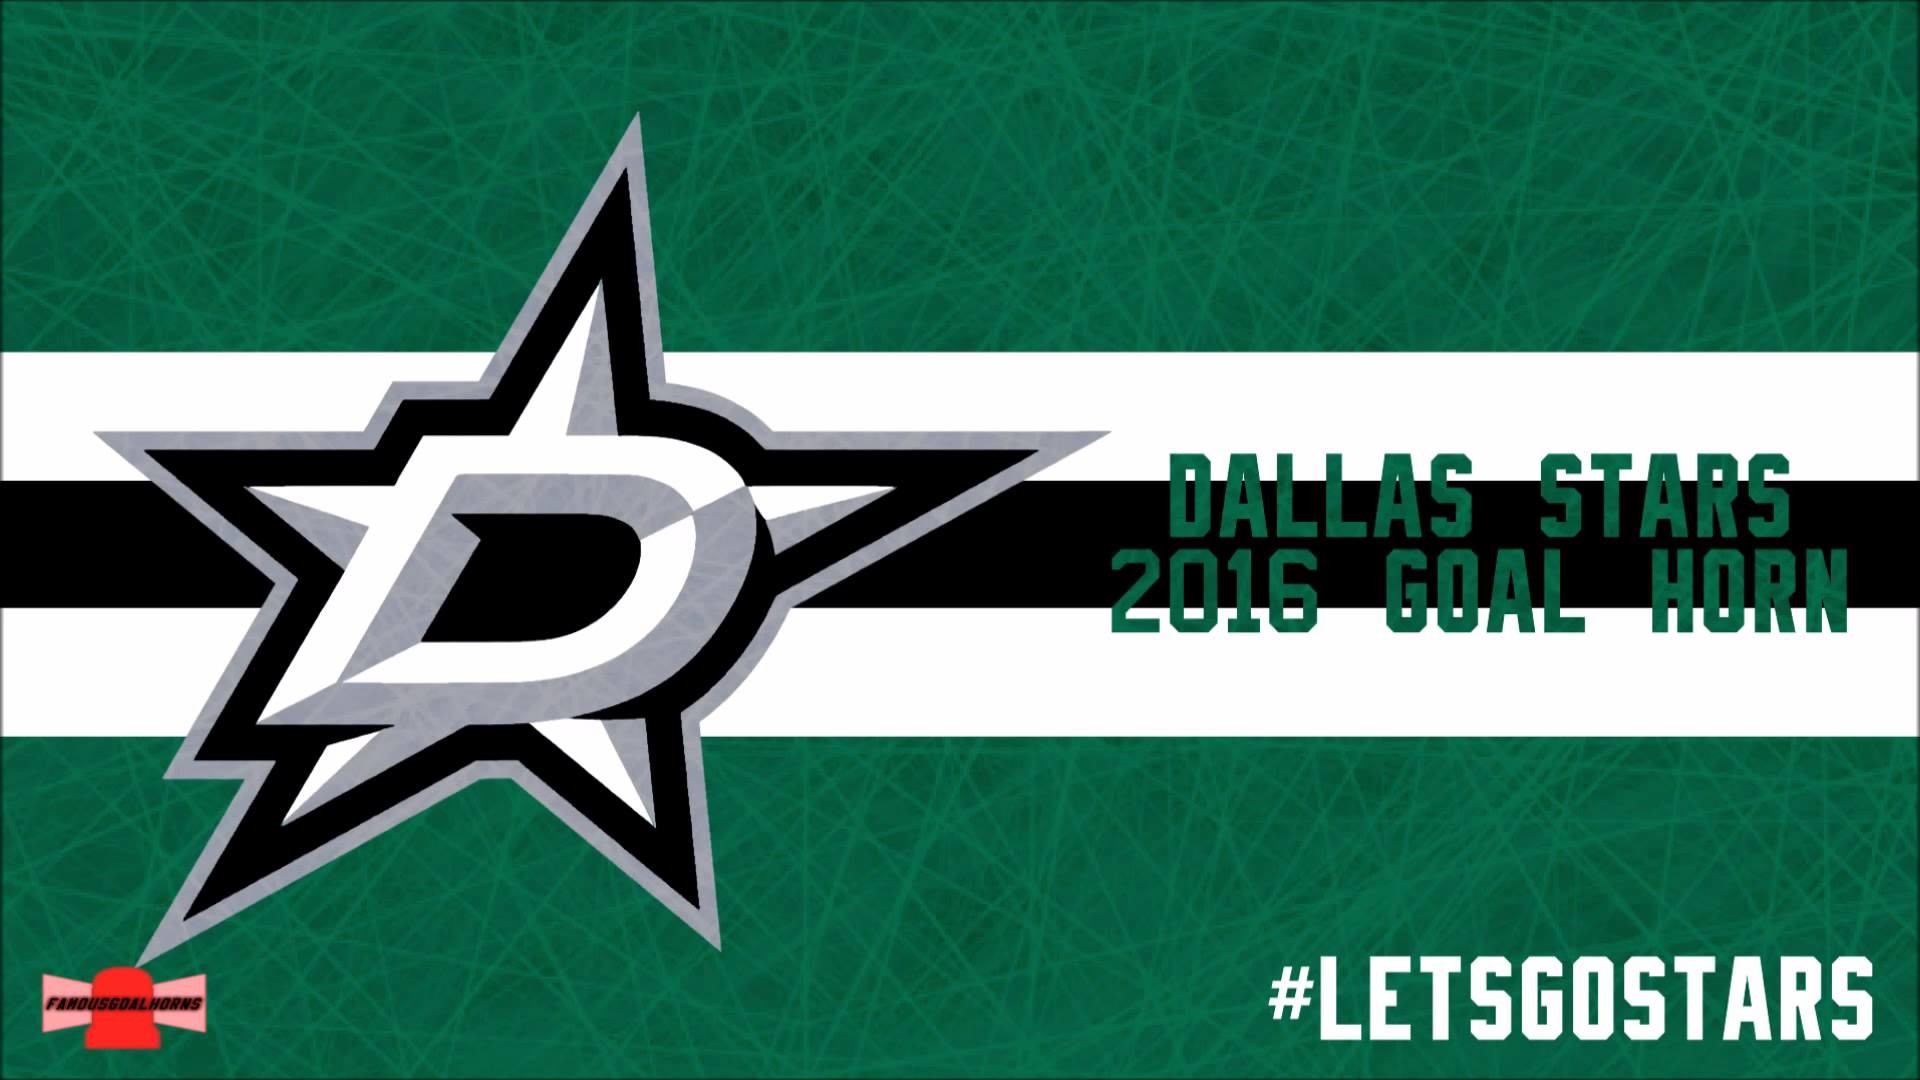 Download wallpapers Dallas Stars golden logo NHL green metal background  american hockey team National Hockey League Dallas Stars logo hockey  USA for desktop with resolution 2560x1600 High Quality HD pictures  wallpapers